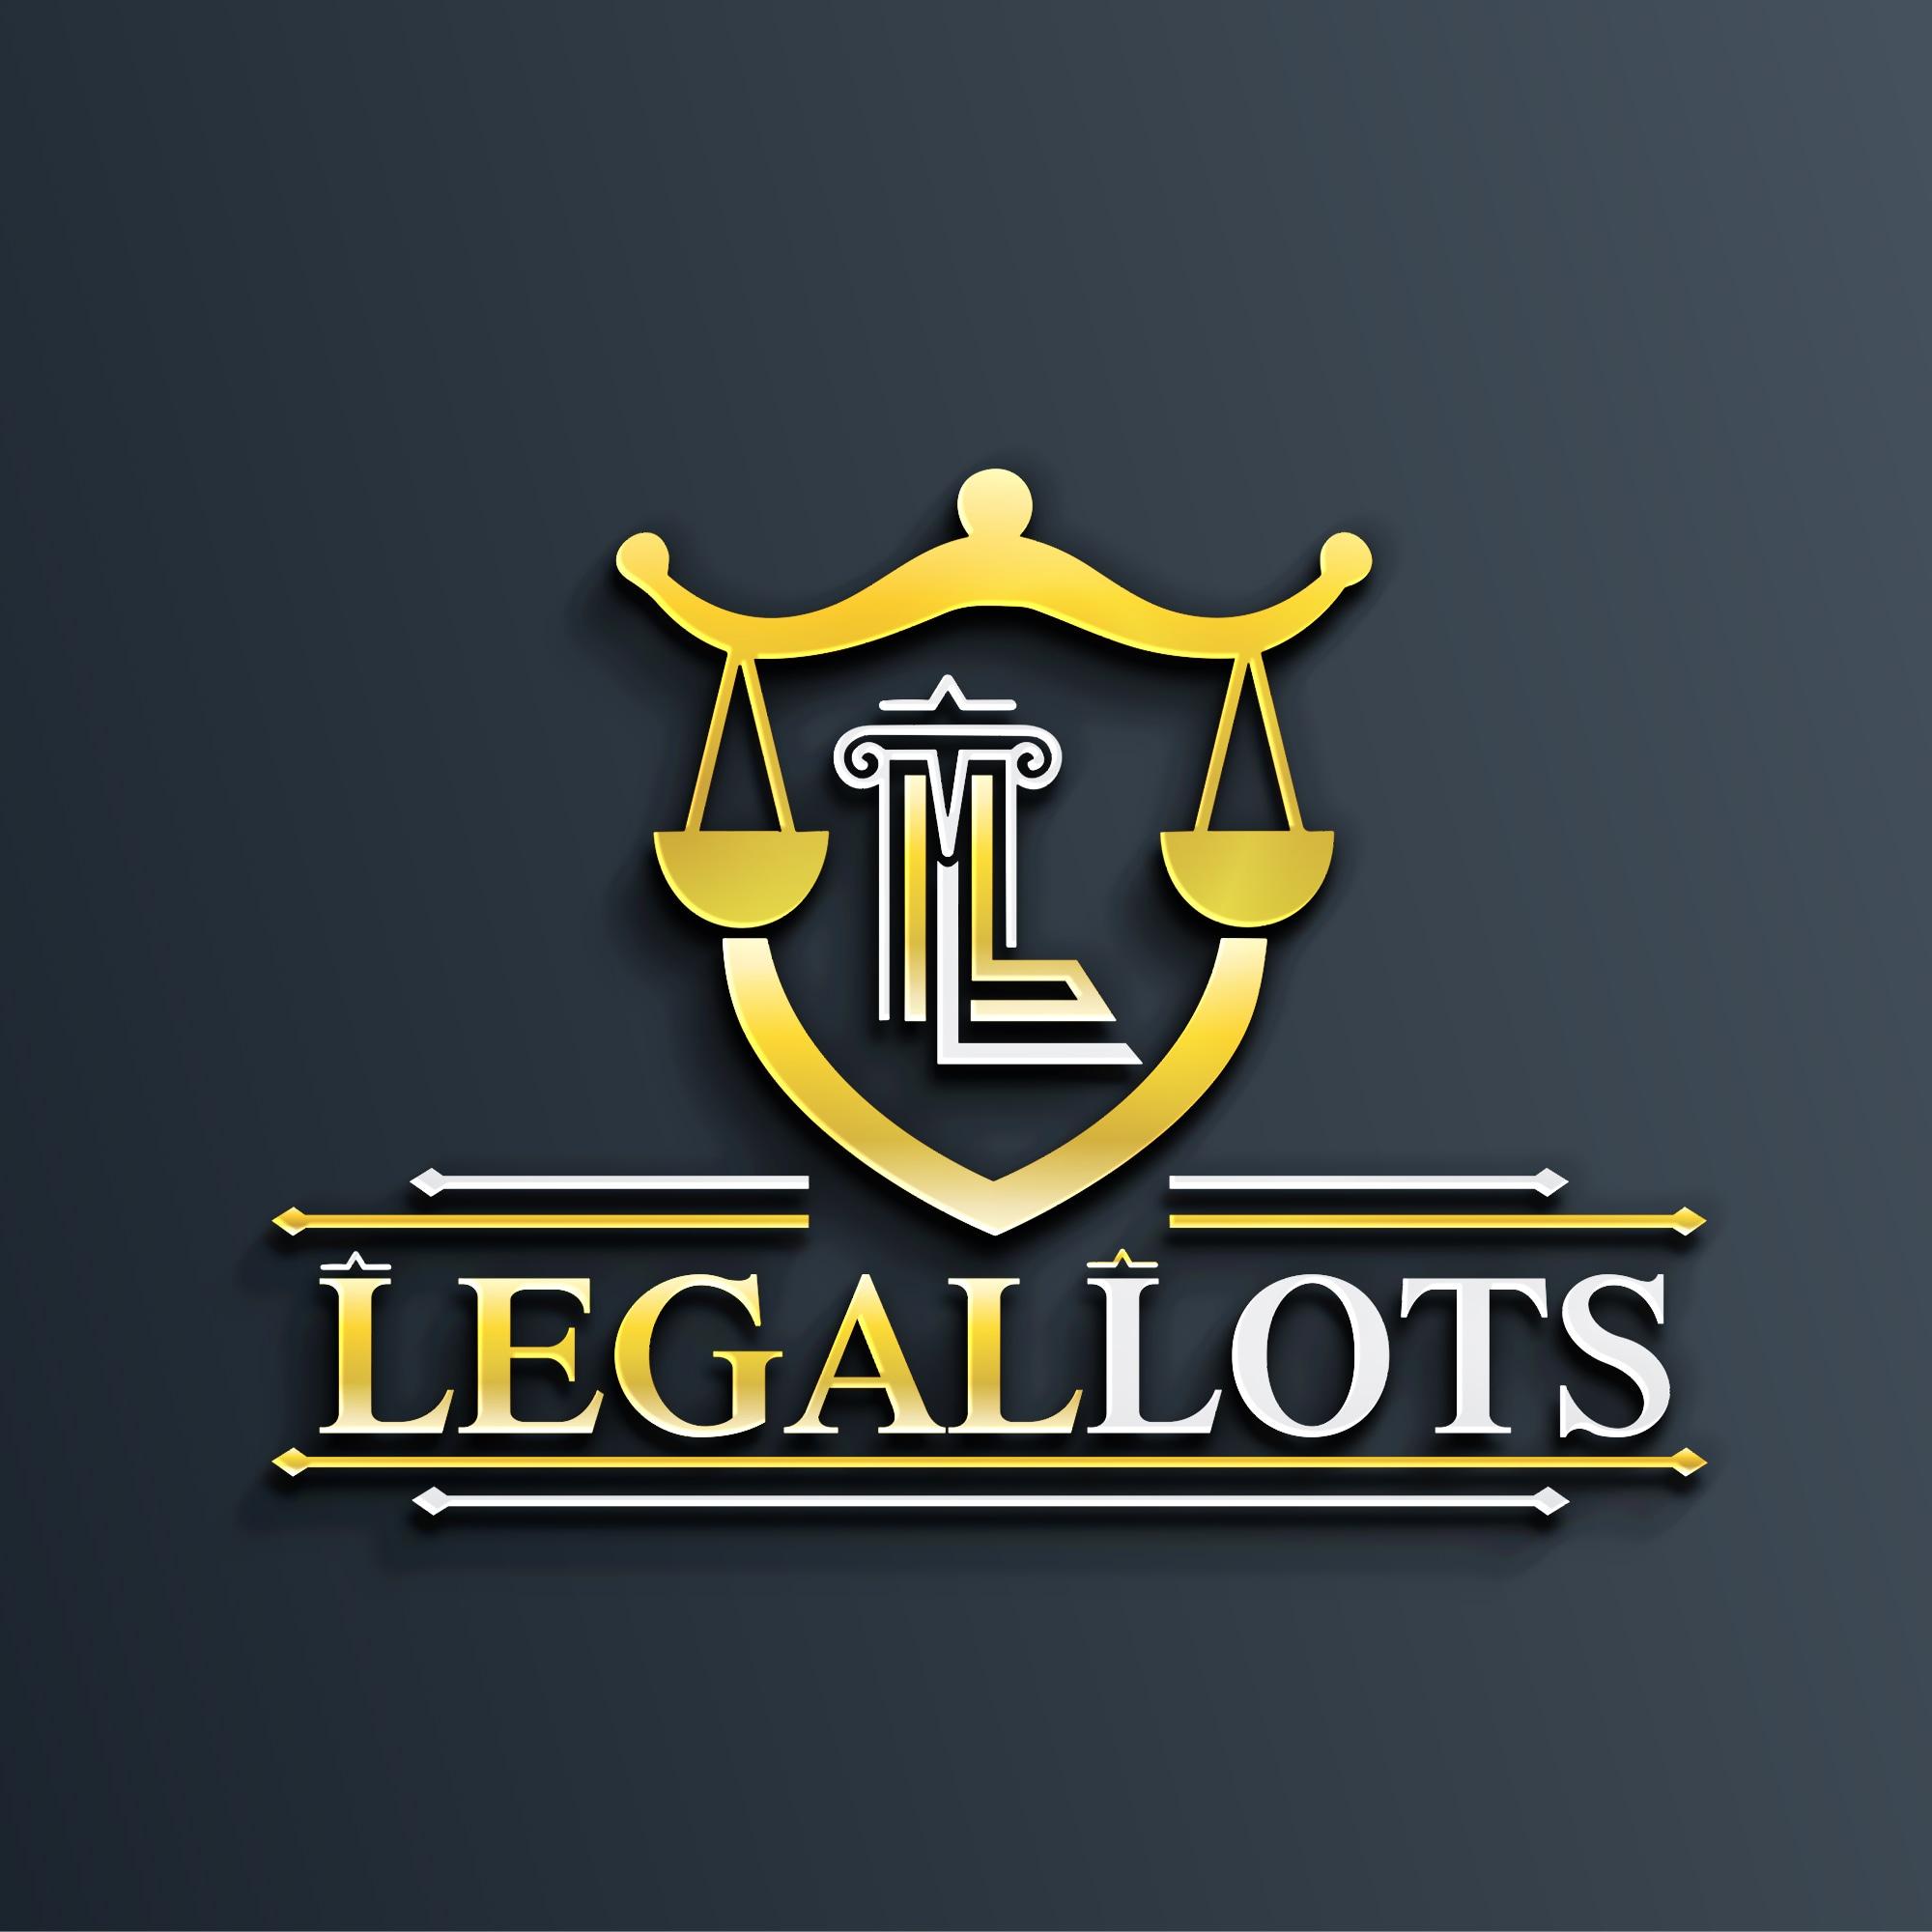 Legal Lots Law Firm